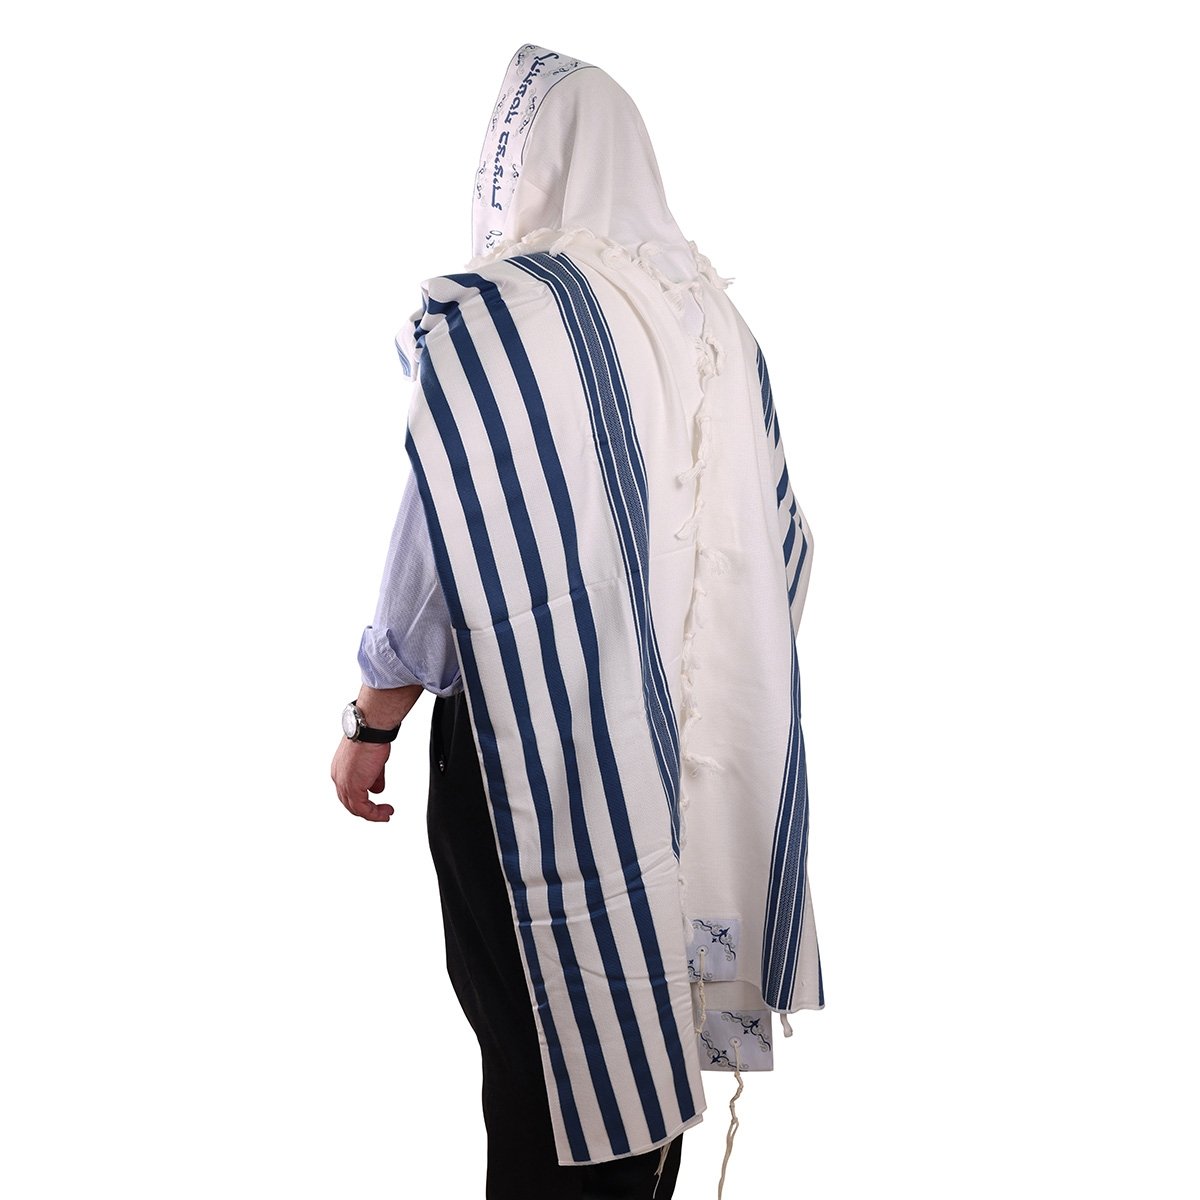 How To Pick the Perfect Tallit: A Gift Guide